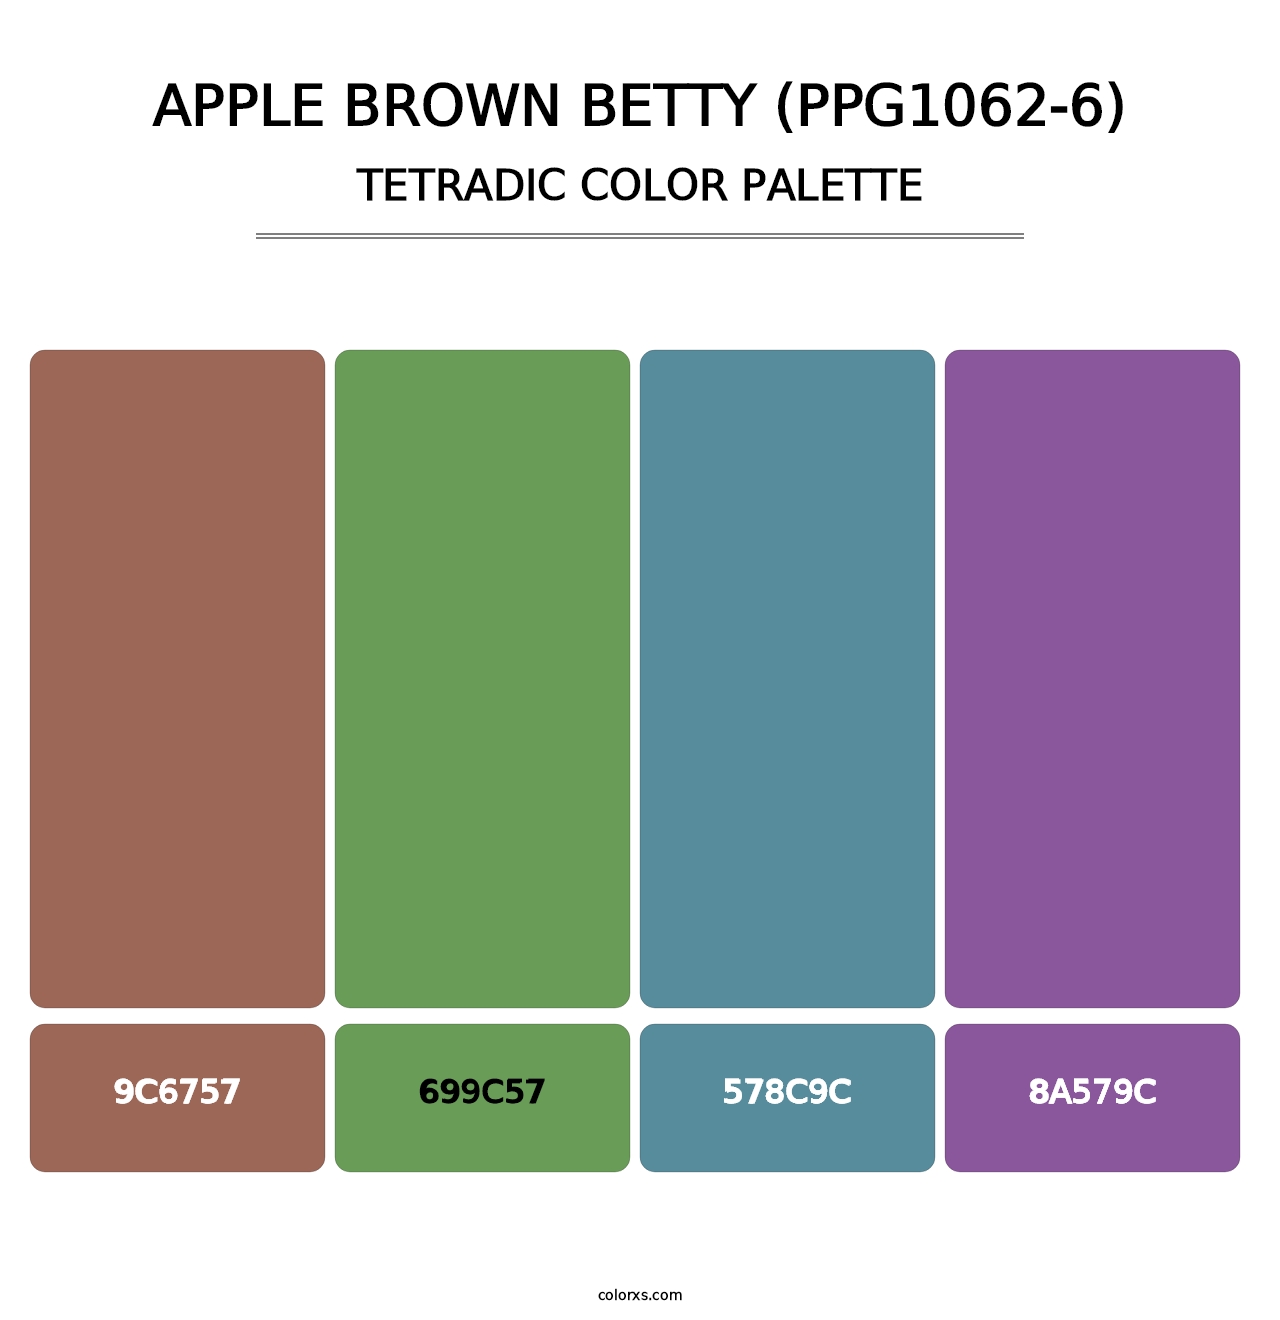 Apple Brown Betty (PPG1062-6) - Tetradic Color Palette